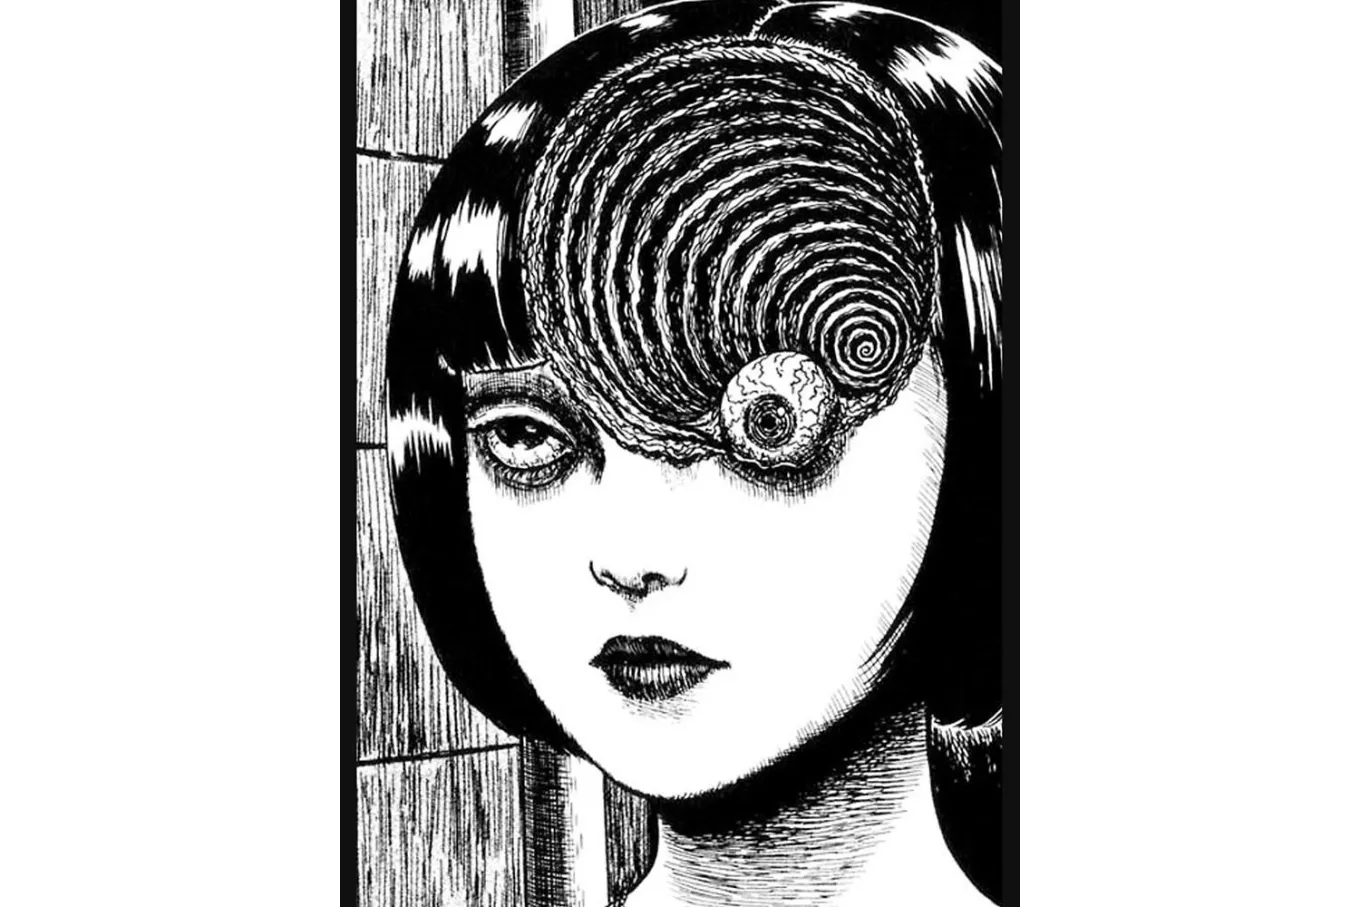 An ink drawing of a woman with a portion of her head missing, with a large spiral made out of the eye stem of the woman's fully exposed left eyeball.